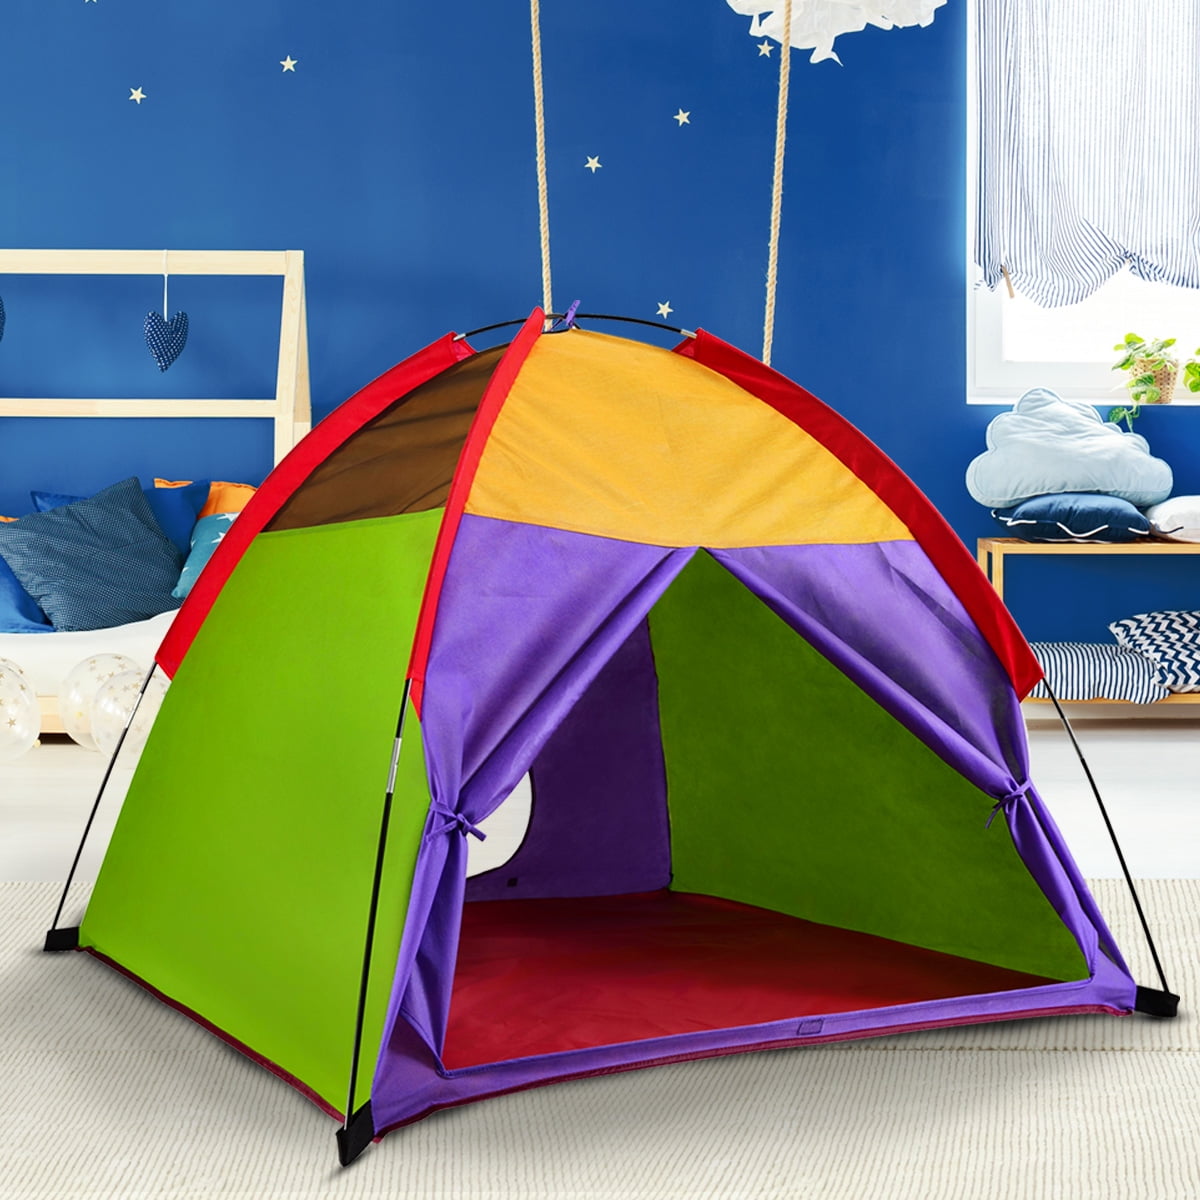 Kiddey Kids Play Tent and Playhouse Indoor/Outdoor Camping Tent for Boys 